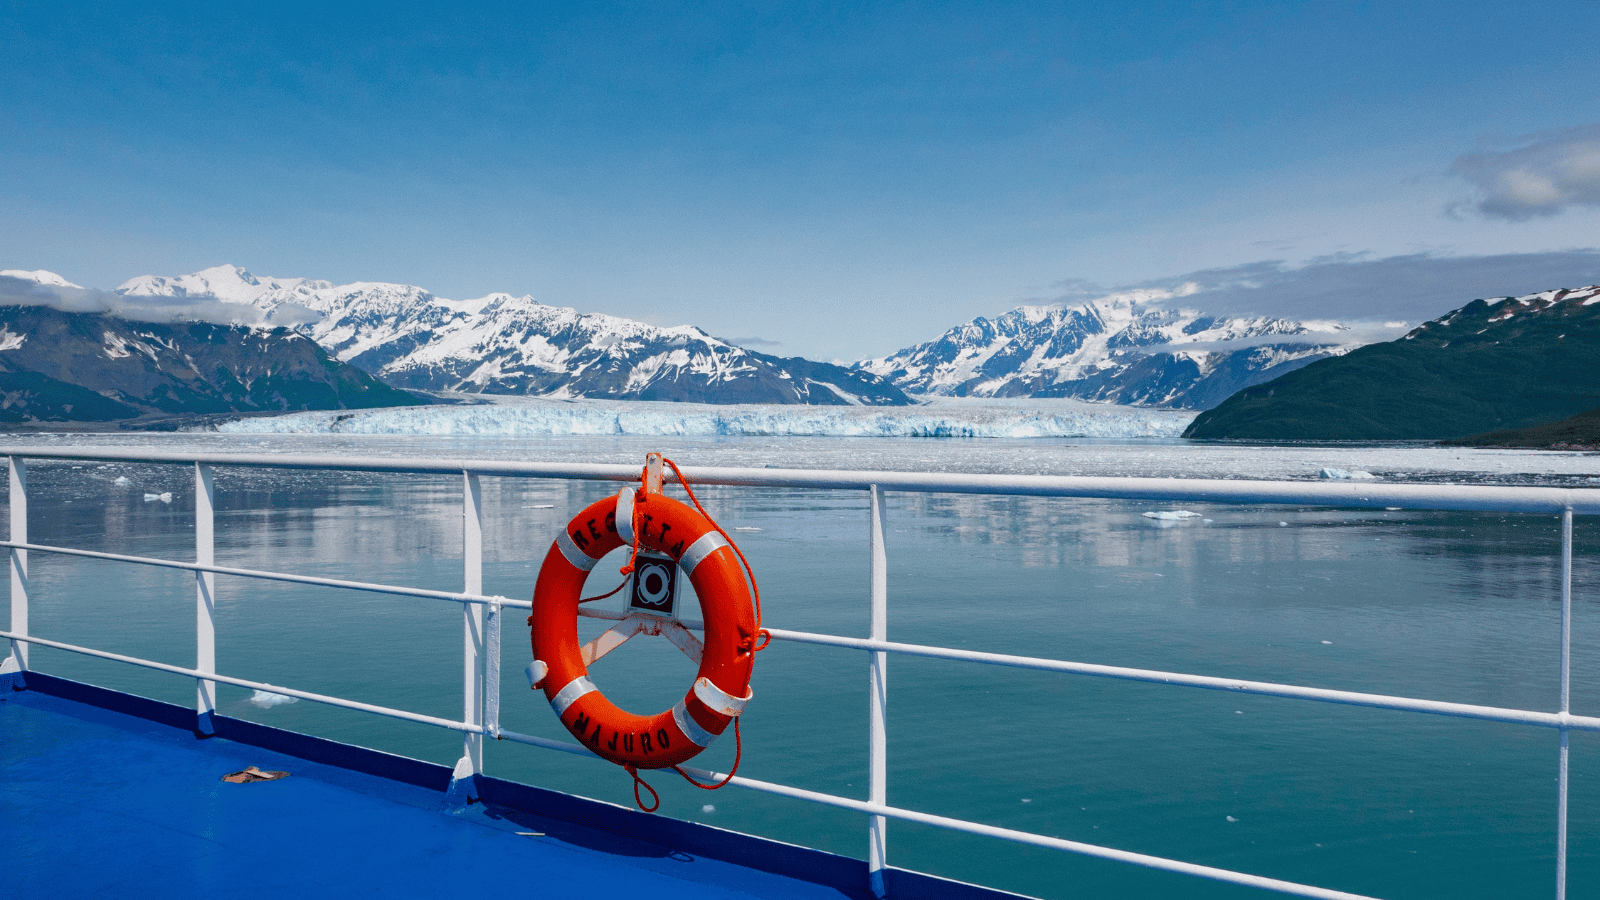 <p>Set sail and prepare for adventure while touring Alaska over 11 days. <a href="https://www.vikingcruises.com/oceans/cruise-destinations/caribbean-americas/alaska-inside-passage/index.html" rel="nofollow external noopener noreferrer">Viking Cruises</a> has created an immersive itinerary to enjoy the state’s dramatic landscapes and rich history. Its Alaska & the Inside Passage cruise travels from <a href="https://whatthefab.com/places-to-go-vancouver.html" rel="follow">Vancouver</a>, British Columbia, to Seward, Alaska. </p><p>This cruise line prides itself on a “no nickel-and-diming” mentality, meaning that wine and beer are included at meals, water is always free, all cabins have balconies, and specialty restaurants never cost extra.</p>